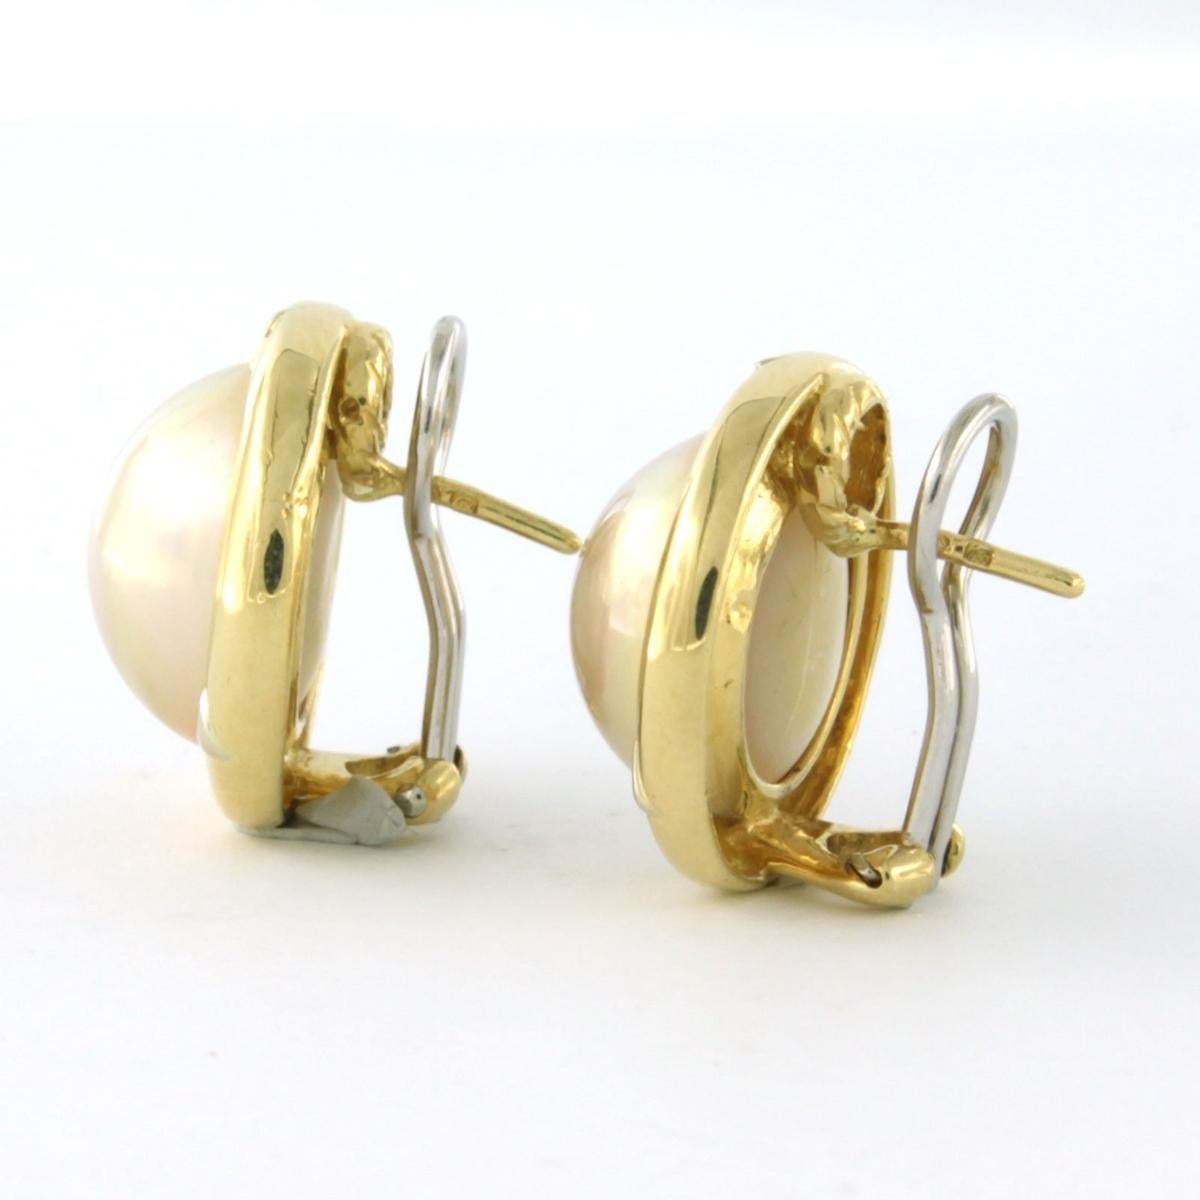 Earrings set with mabee pearl 18k yellow gold For Sale 2